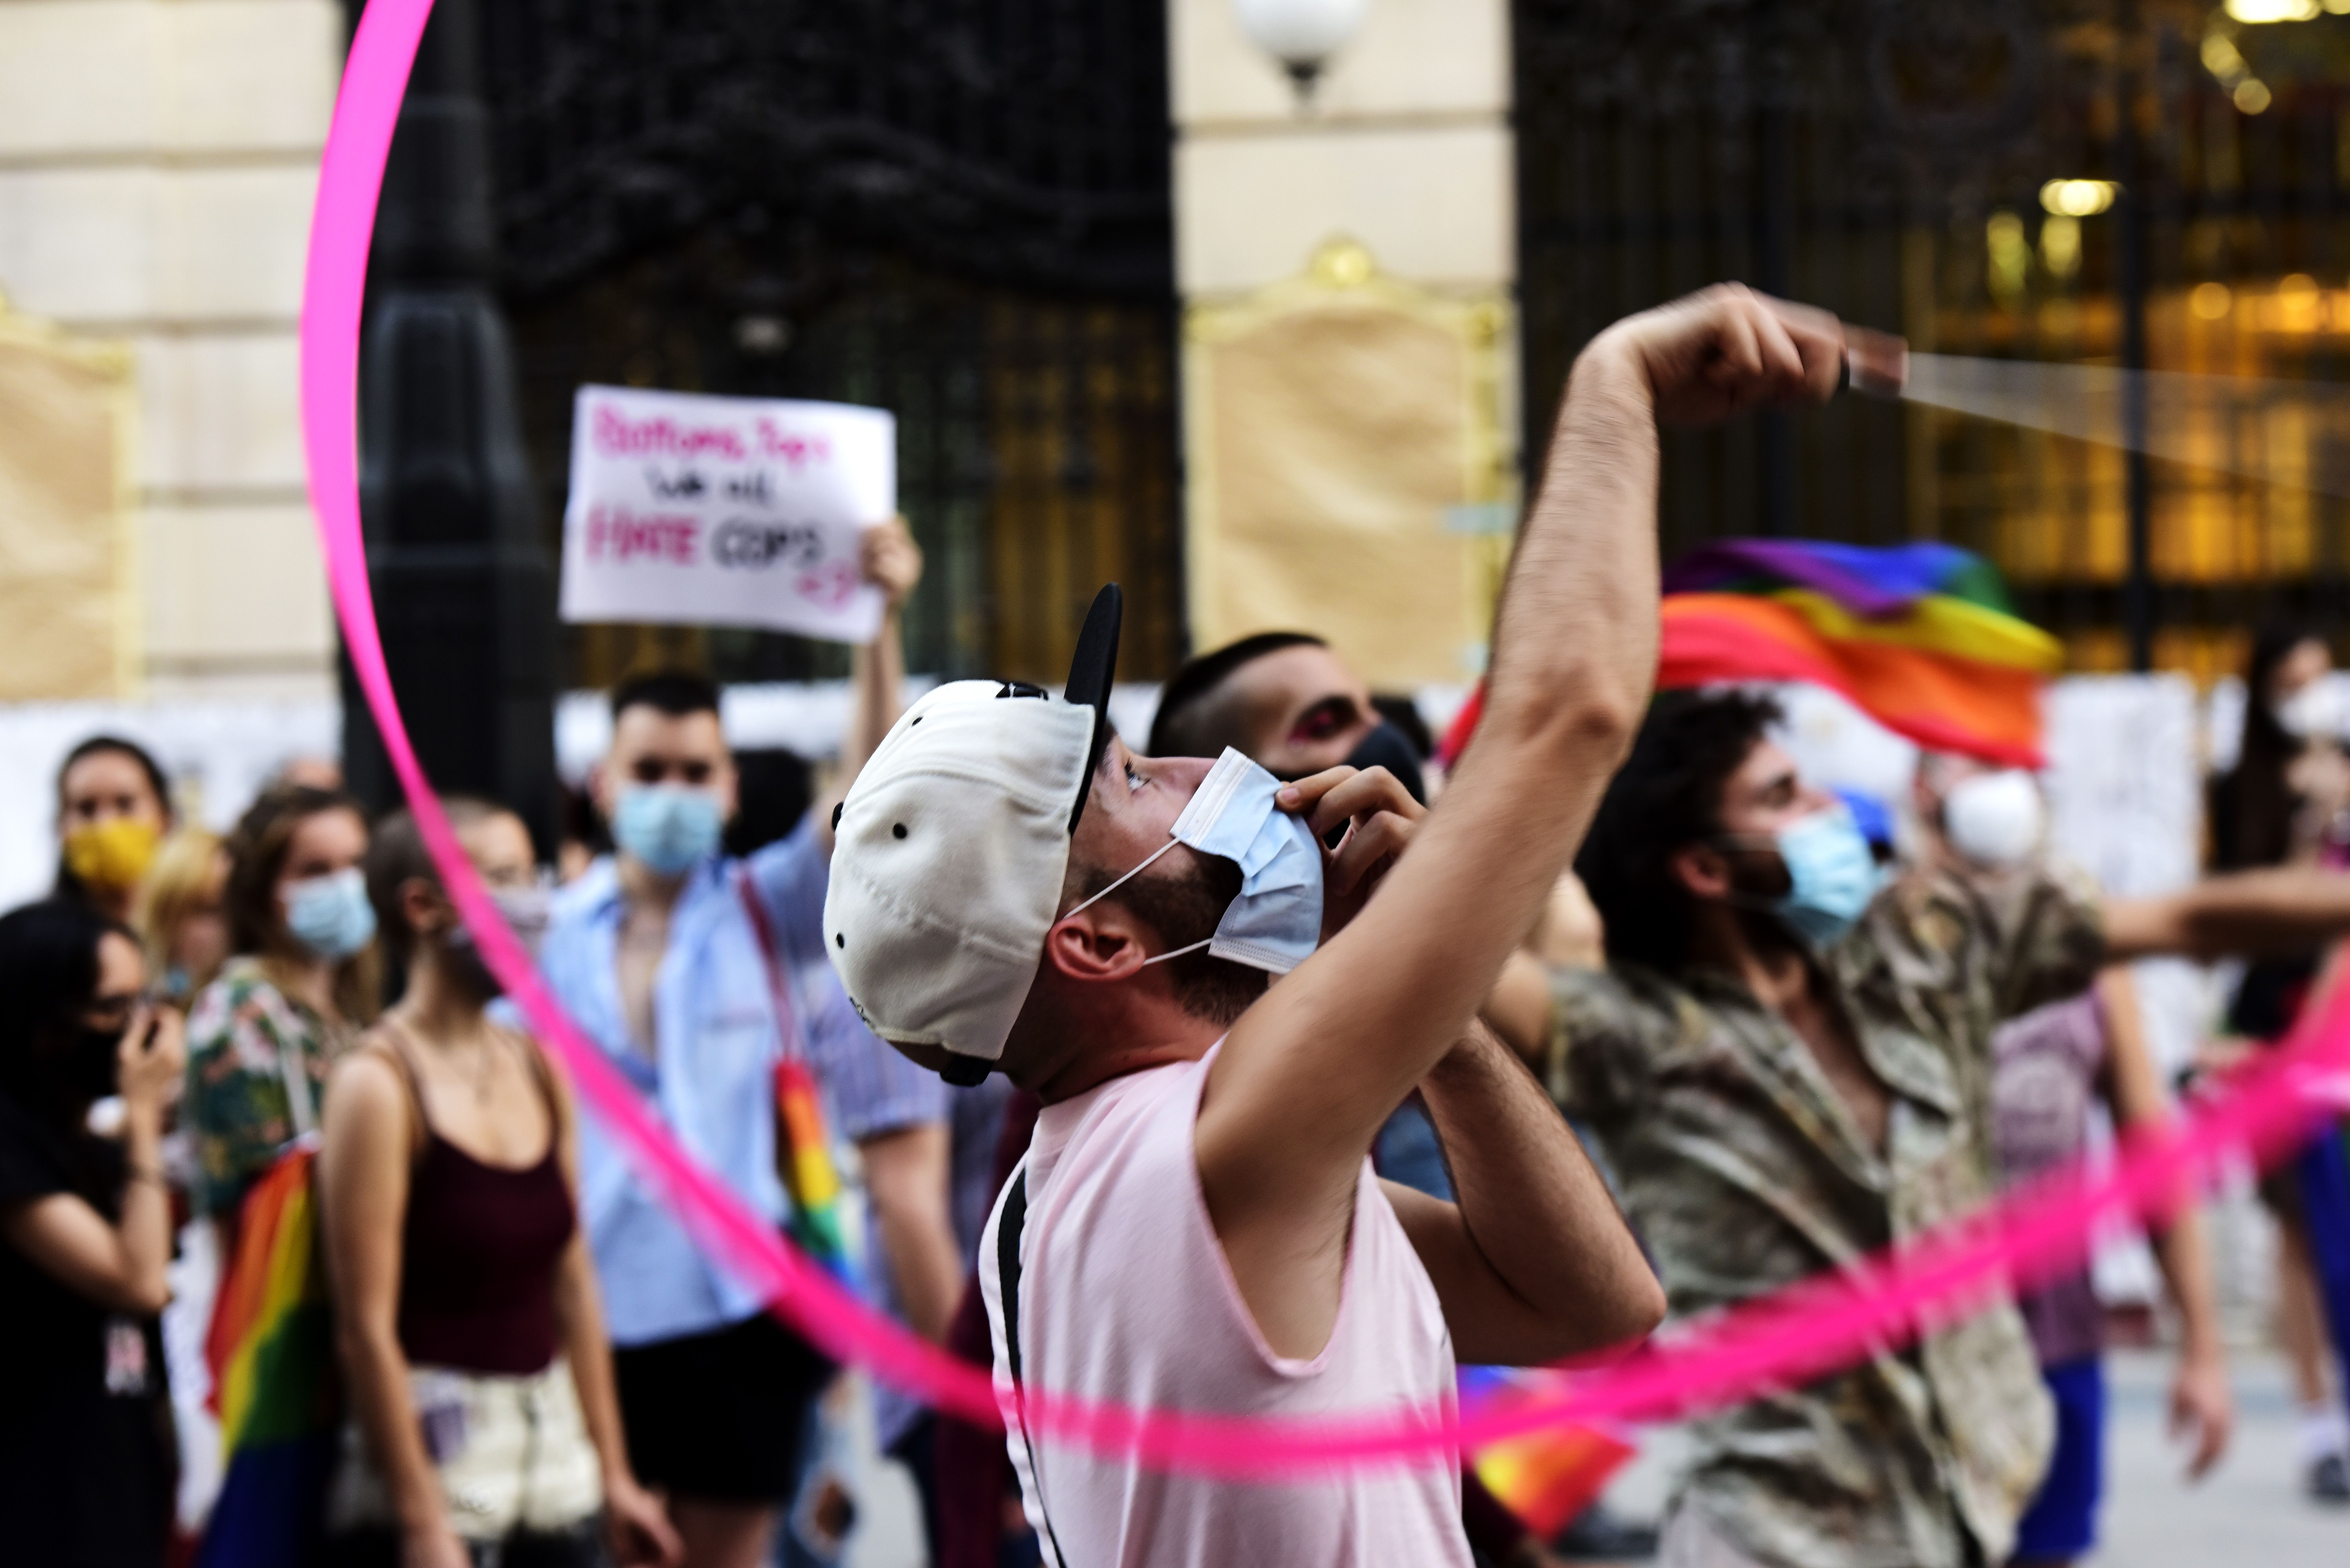 An attendee dances with a ribbon during Alternative Gay Pride on June 28, 2020 in Madrid, Spain